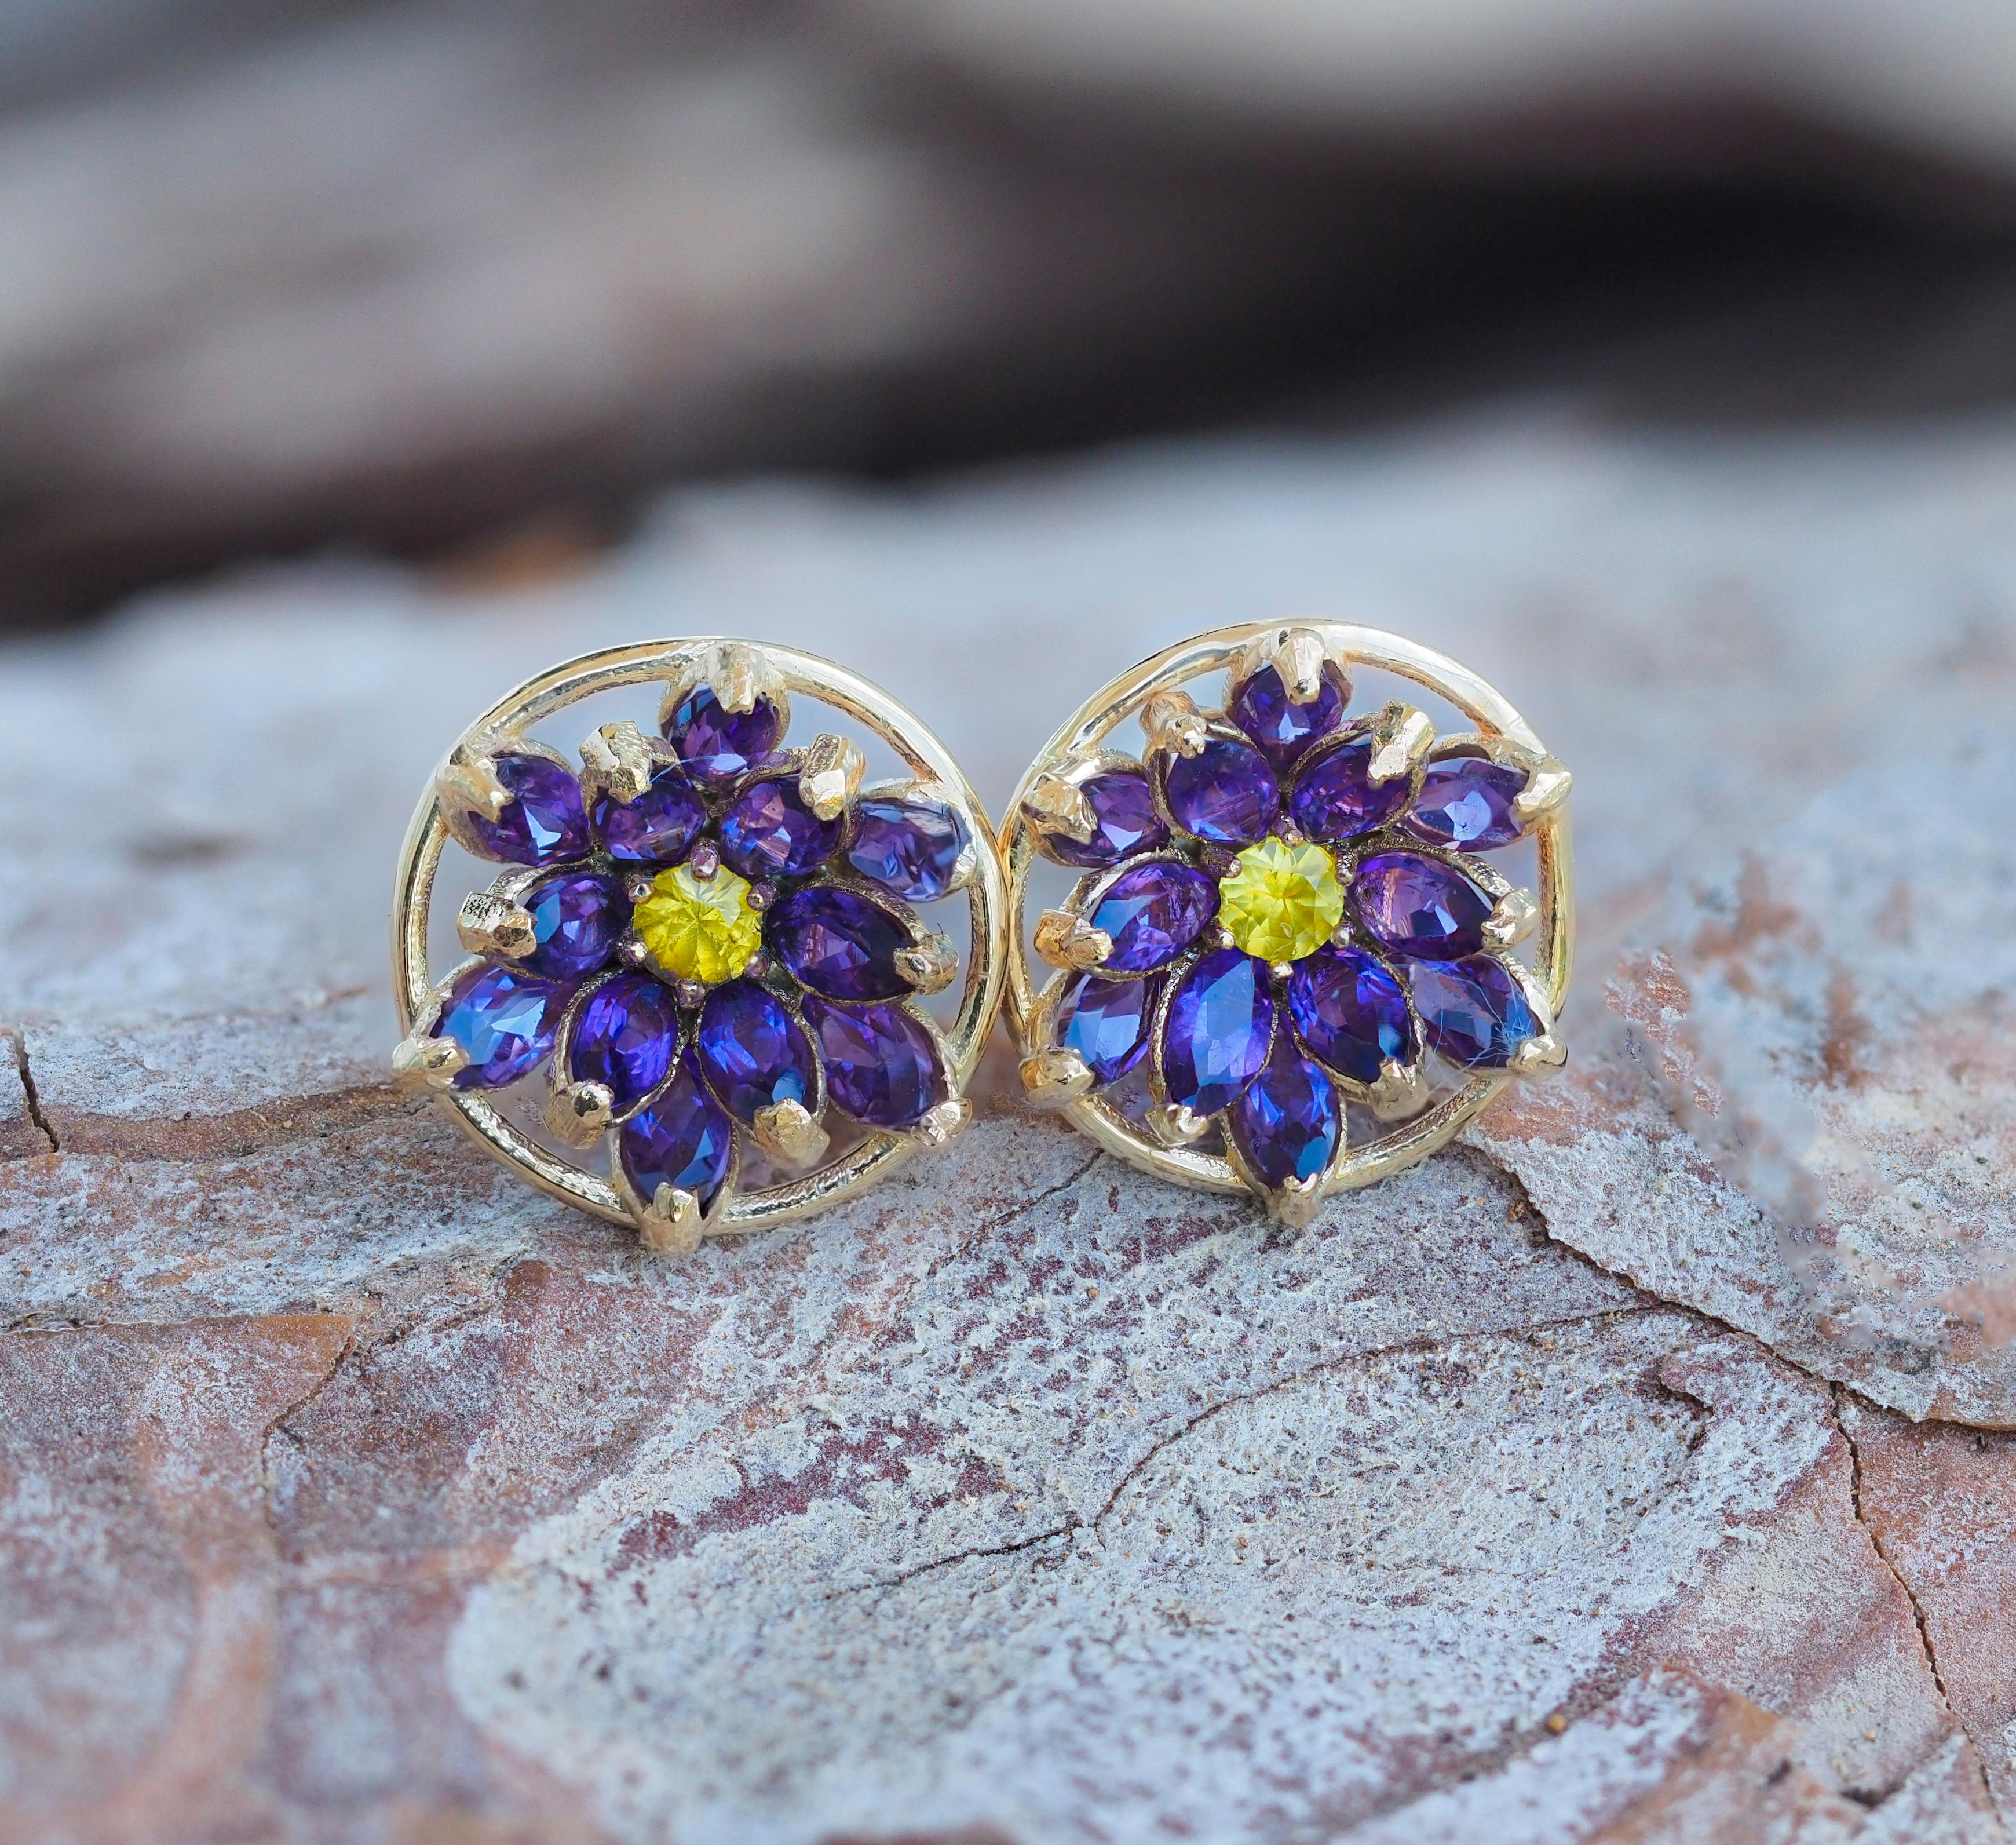 Marquise Cut Lotus flower earrings studs in 14k gold.  For Sale